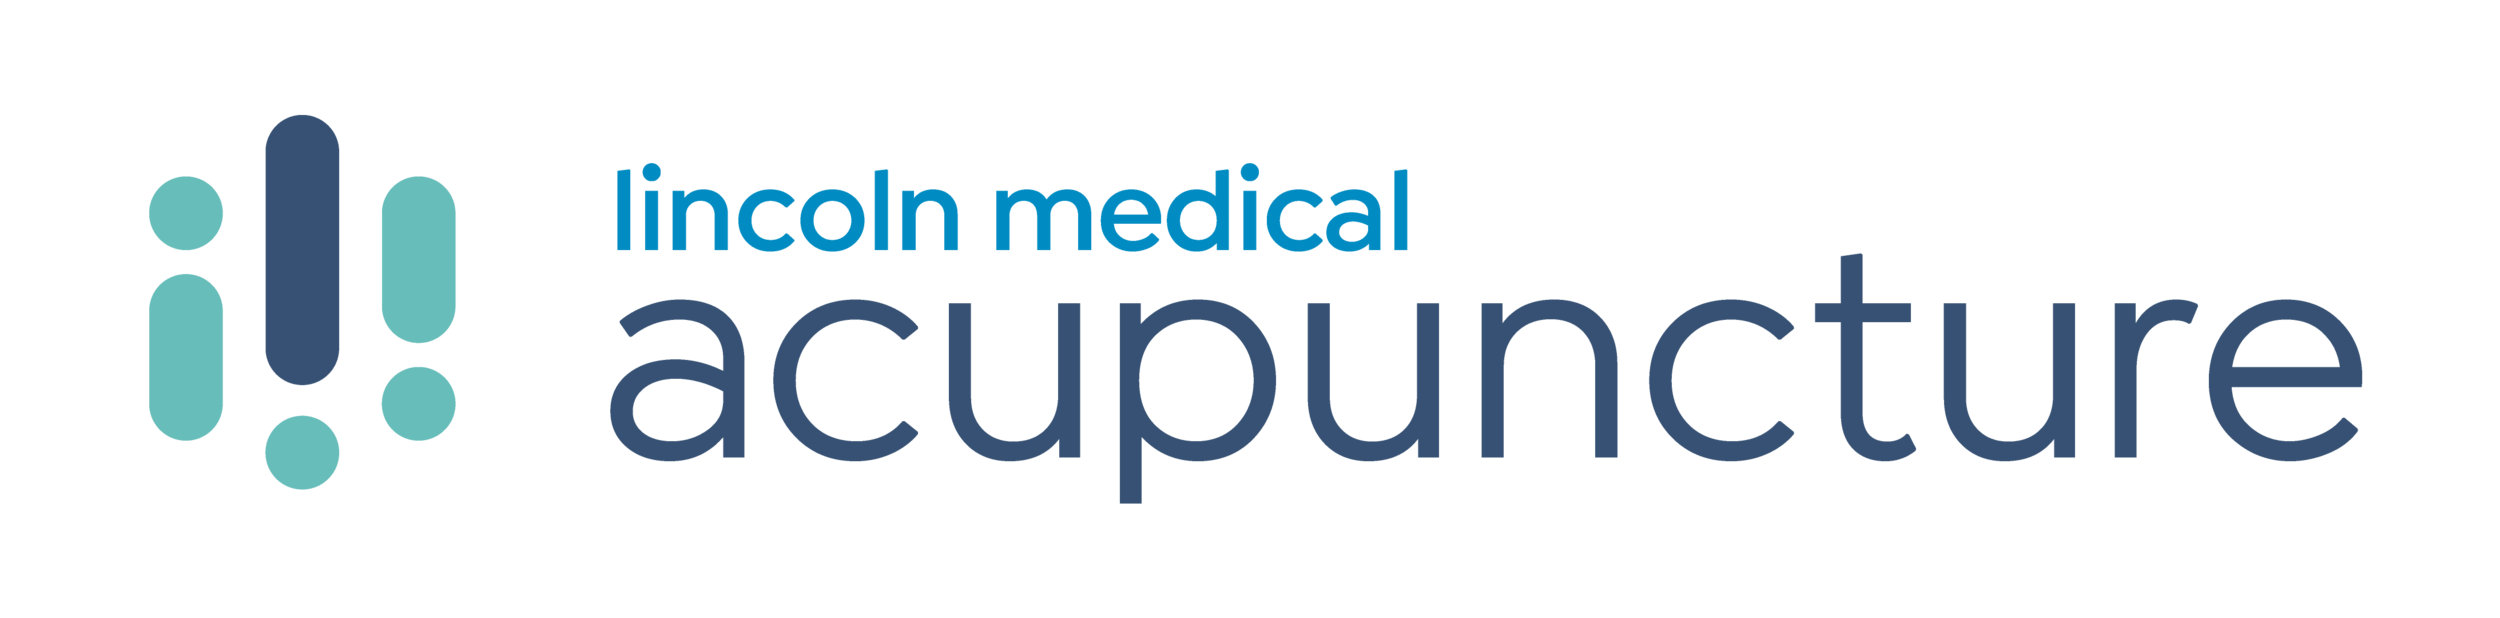 Lincoln Medical Acupuncture